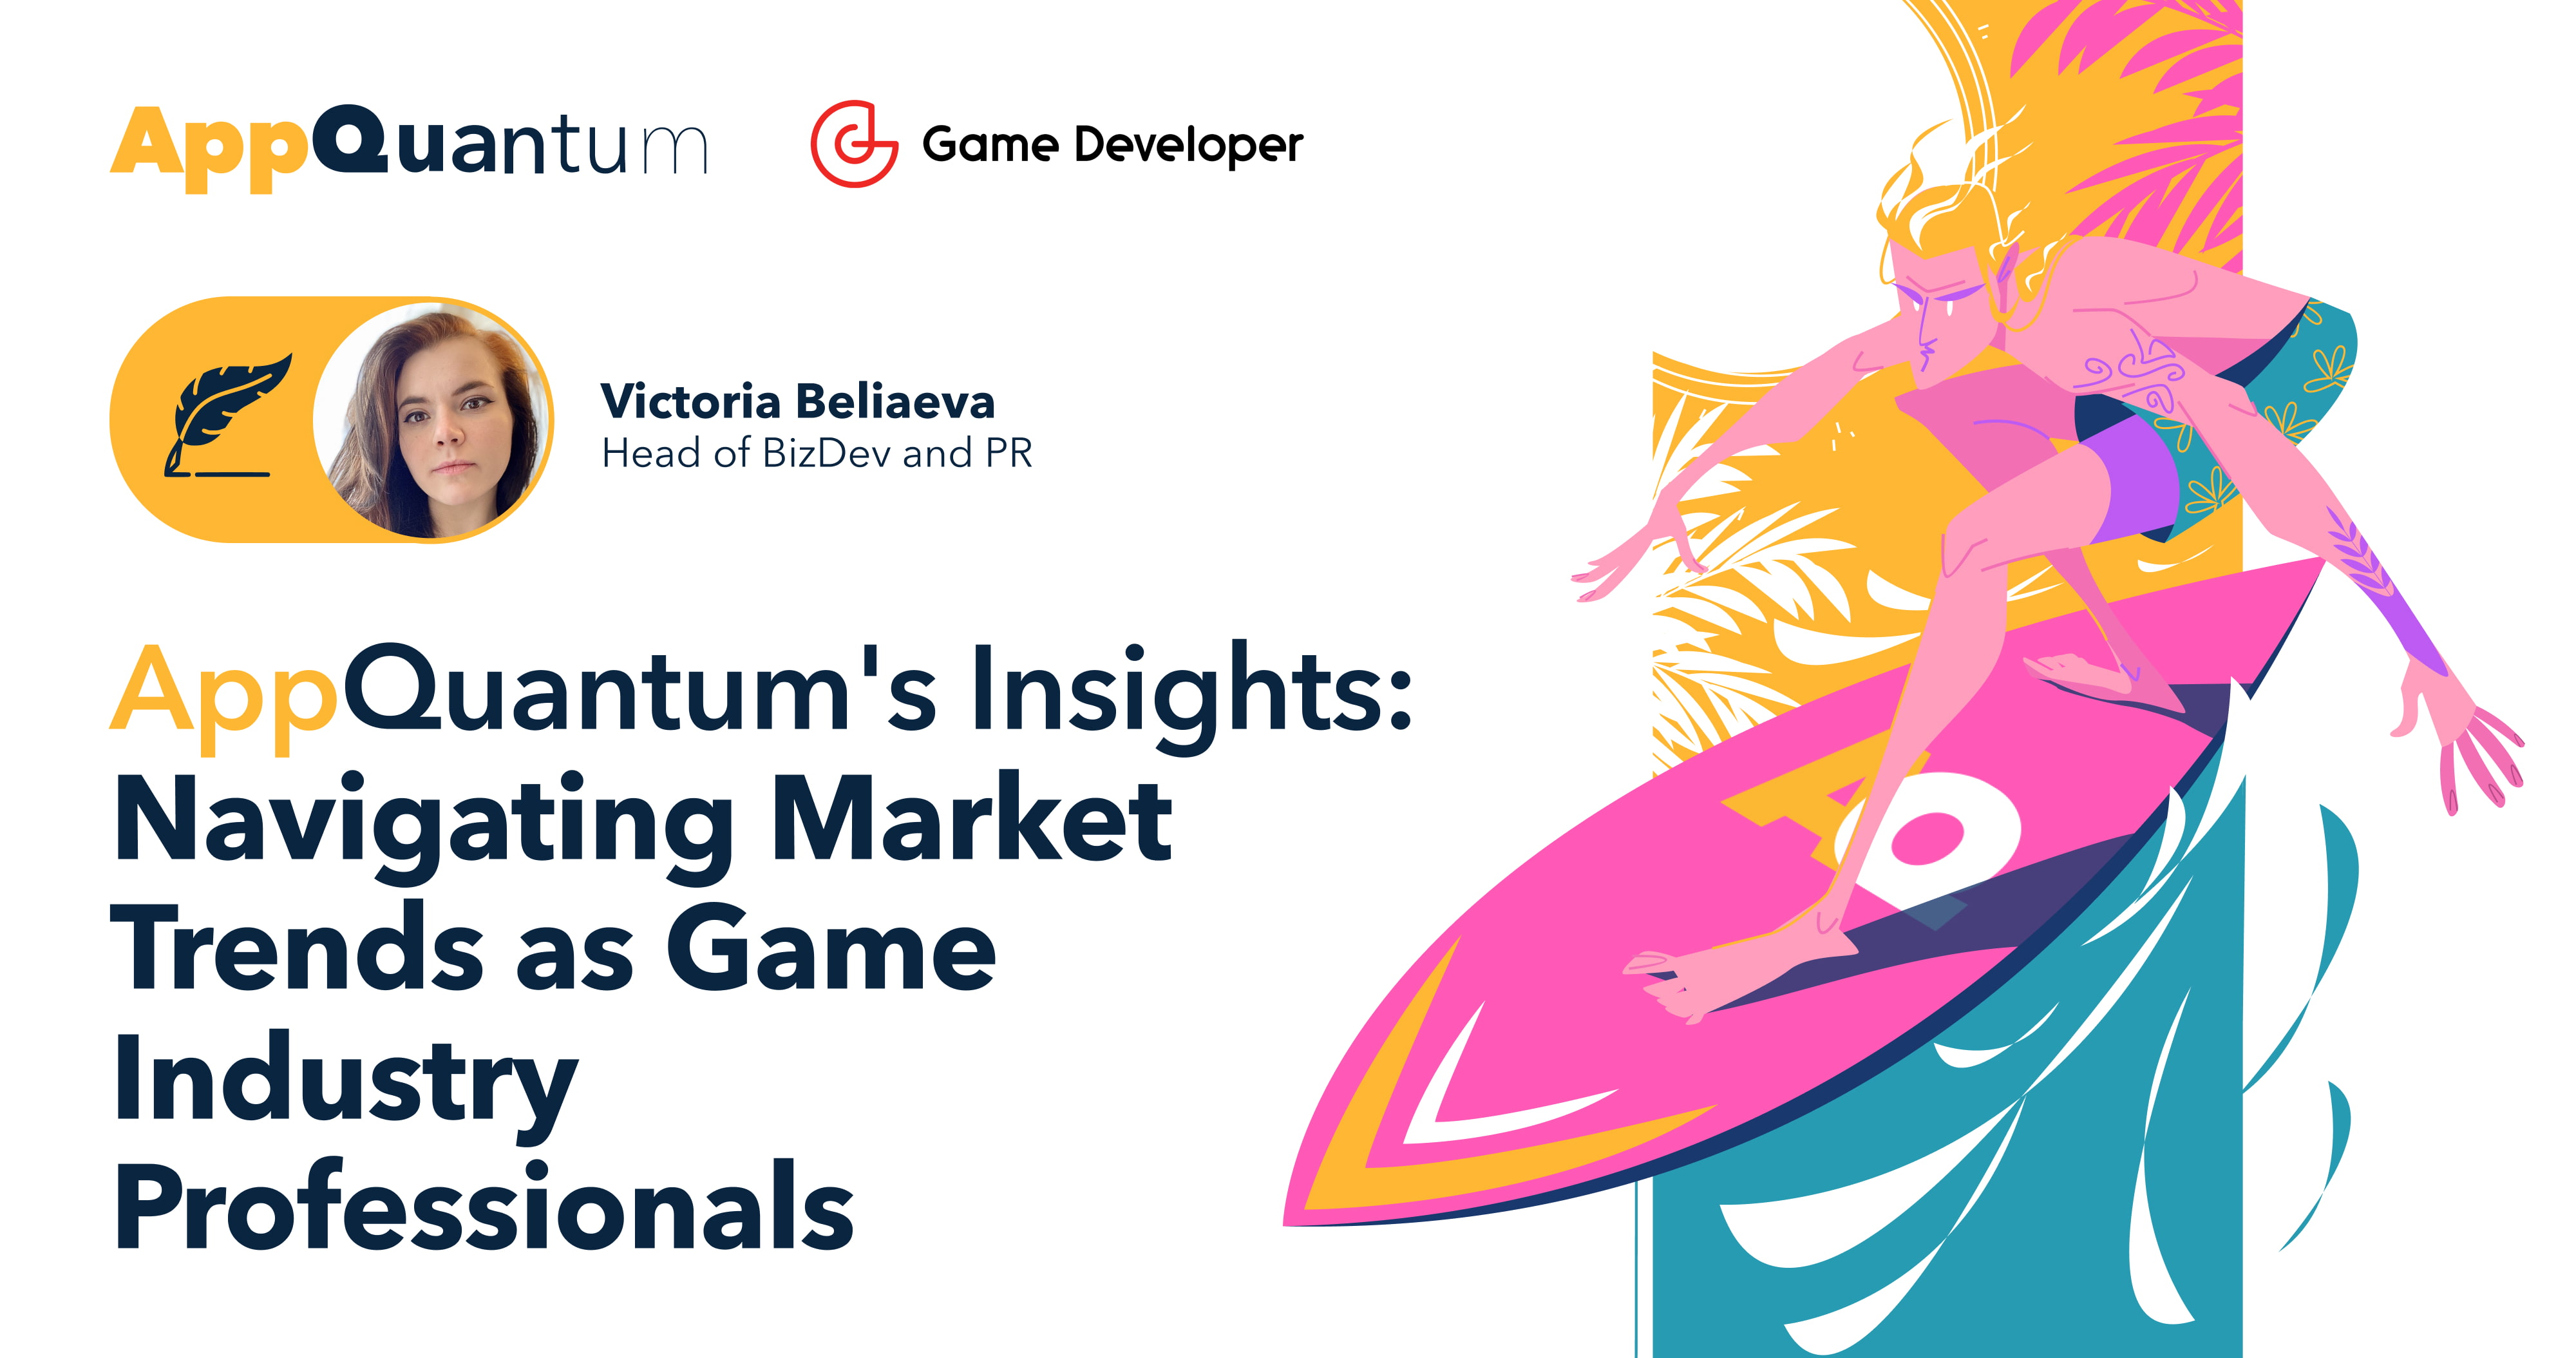 AppQuantum on Game Developer: Navigating Market Trends as Game Industry Professionals